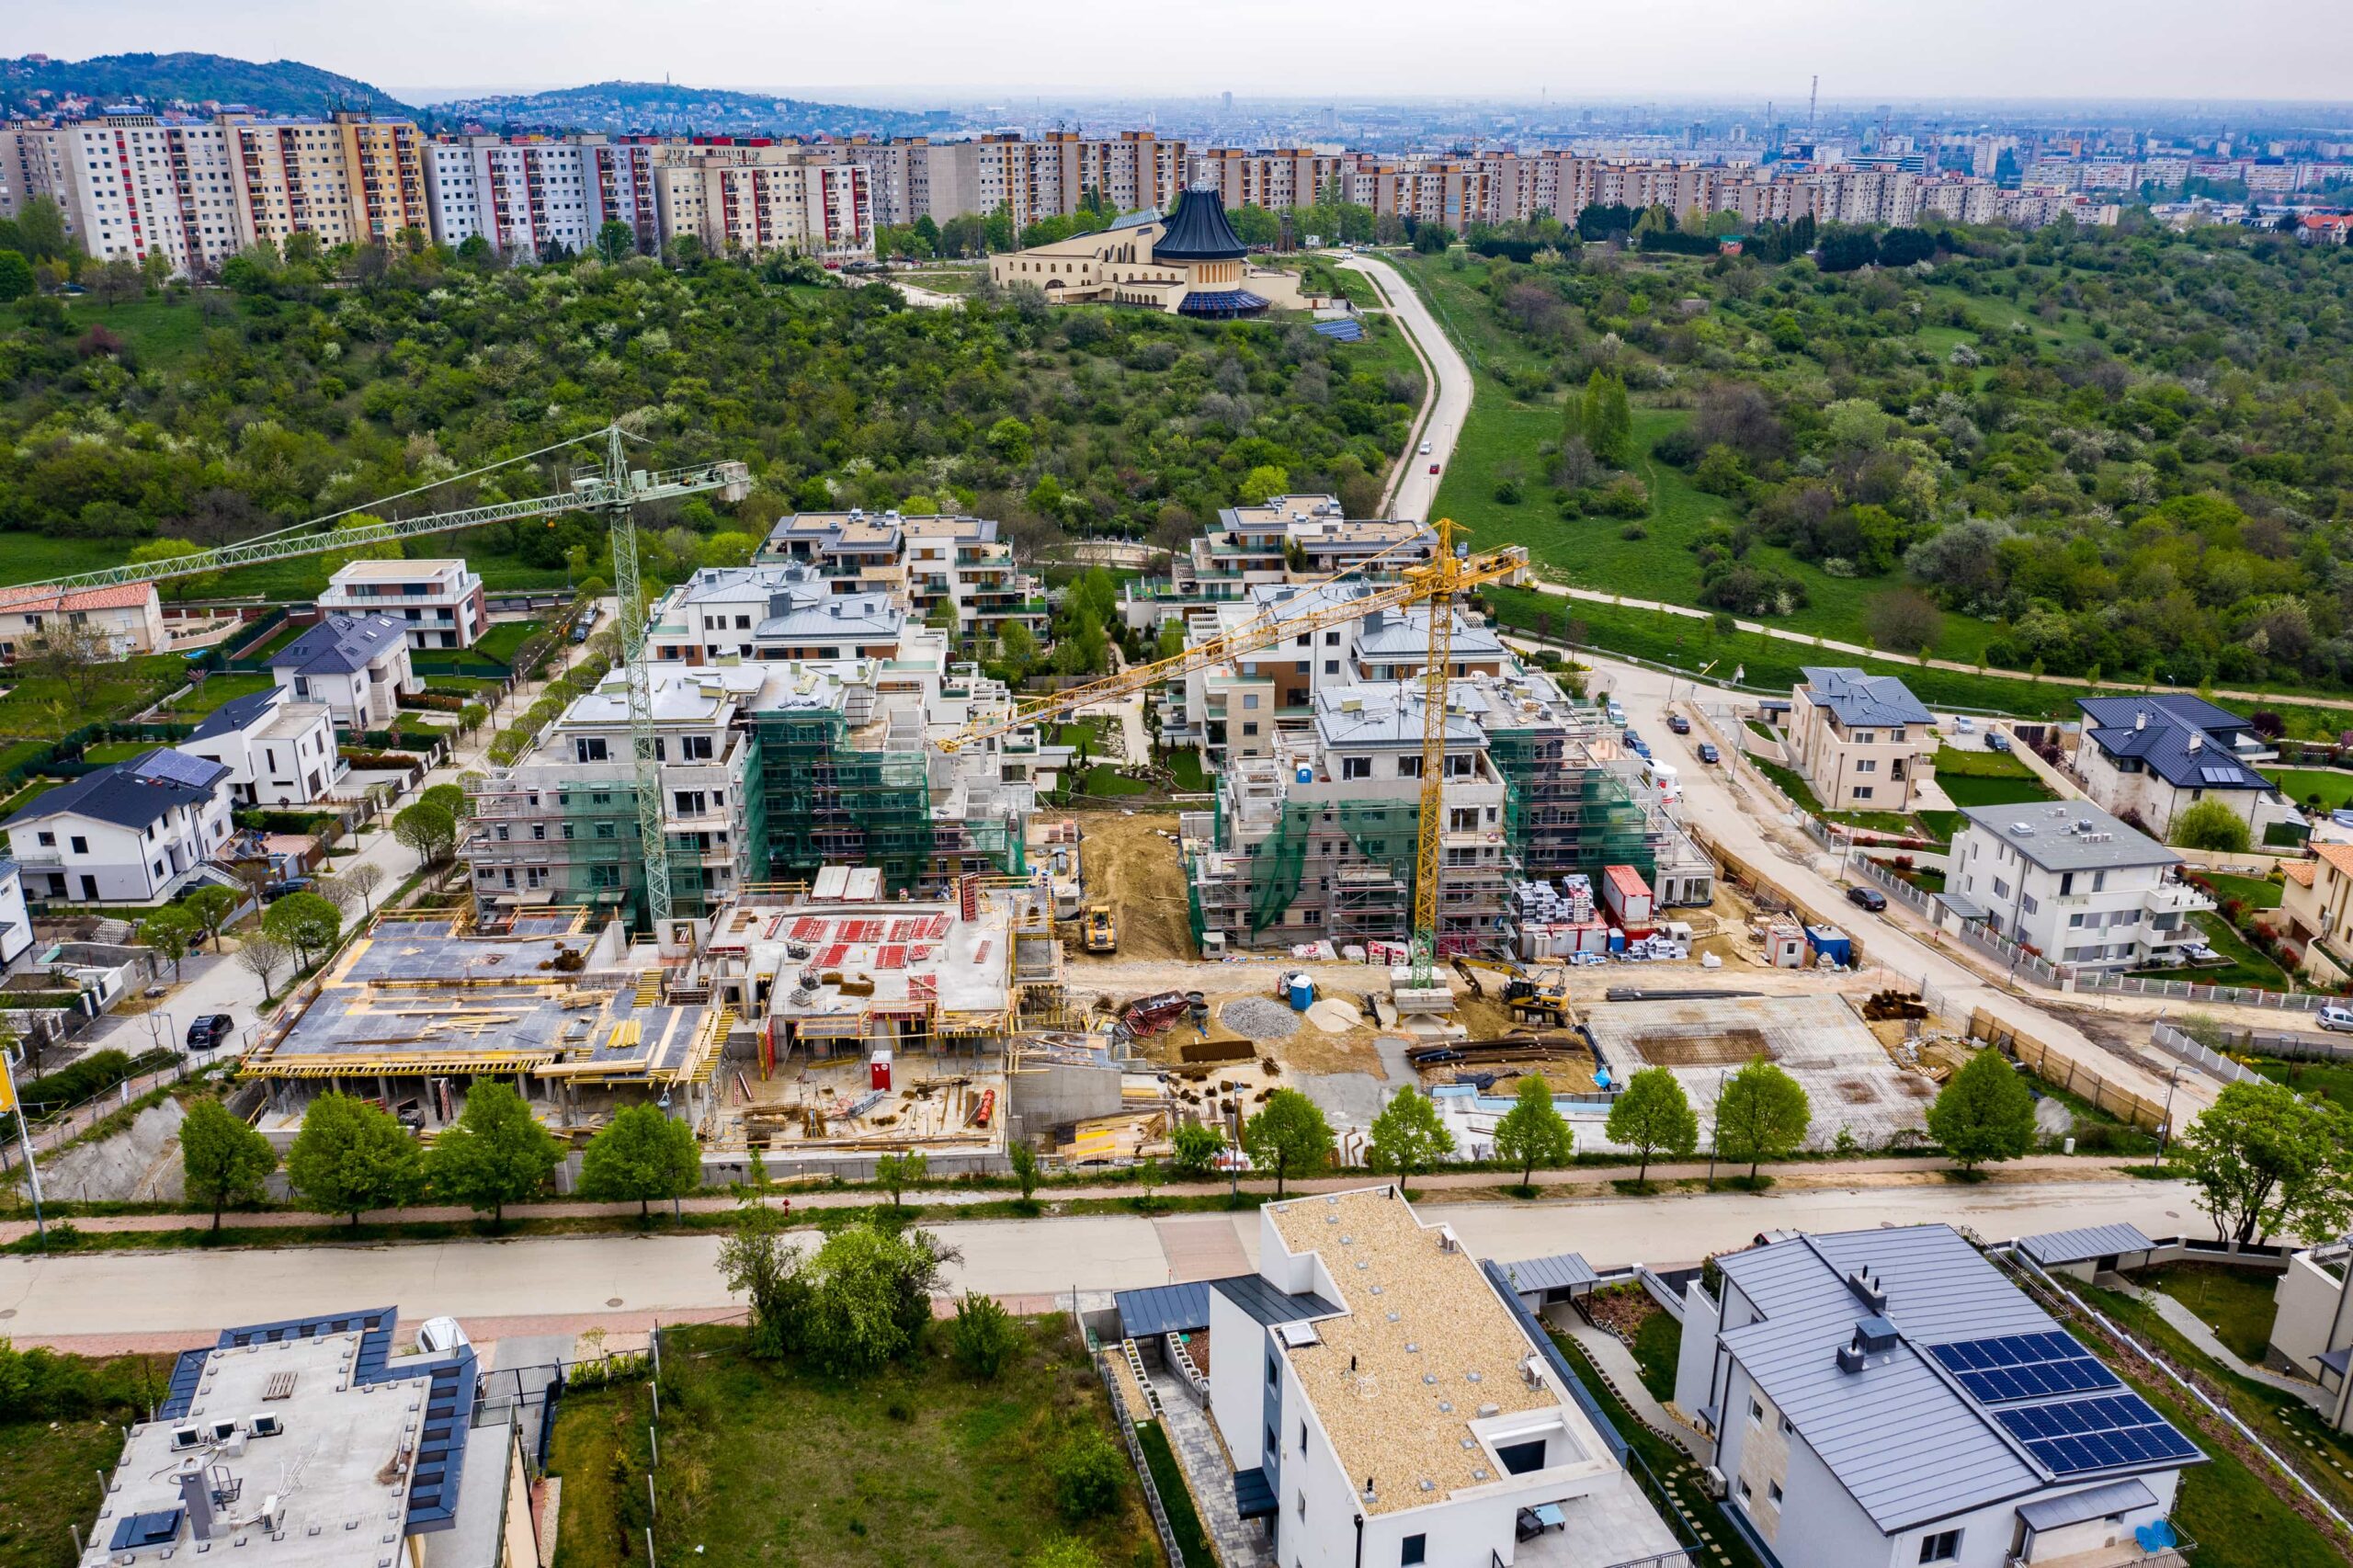 Terrace Residence 4th phase - April 2019